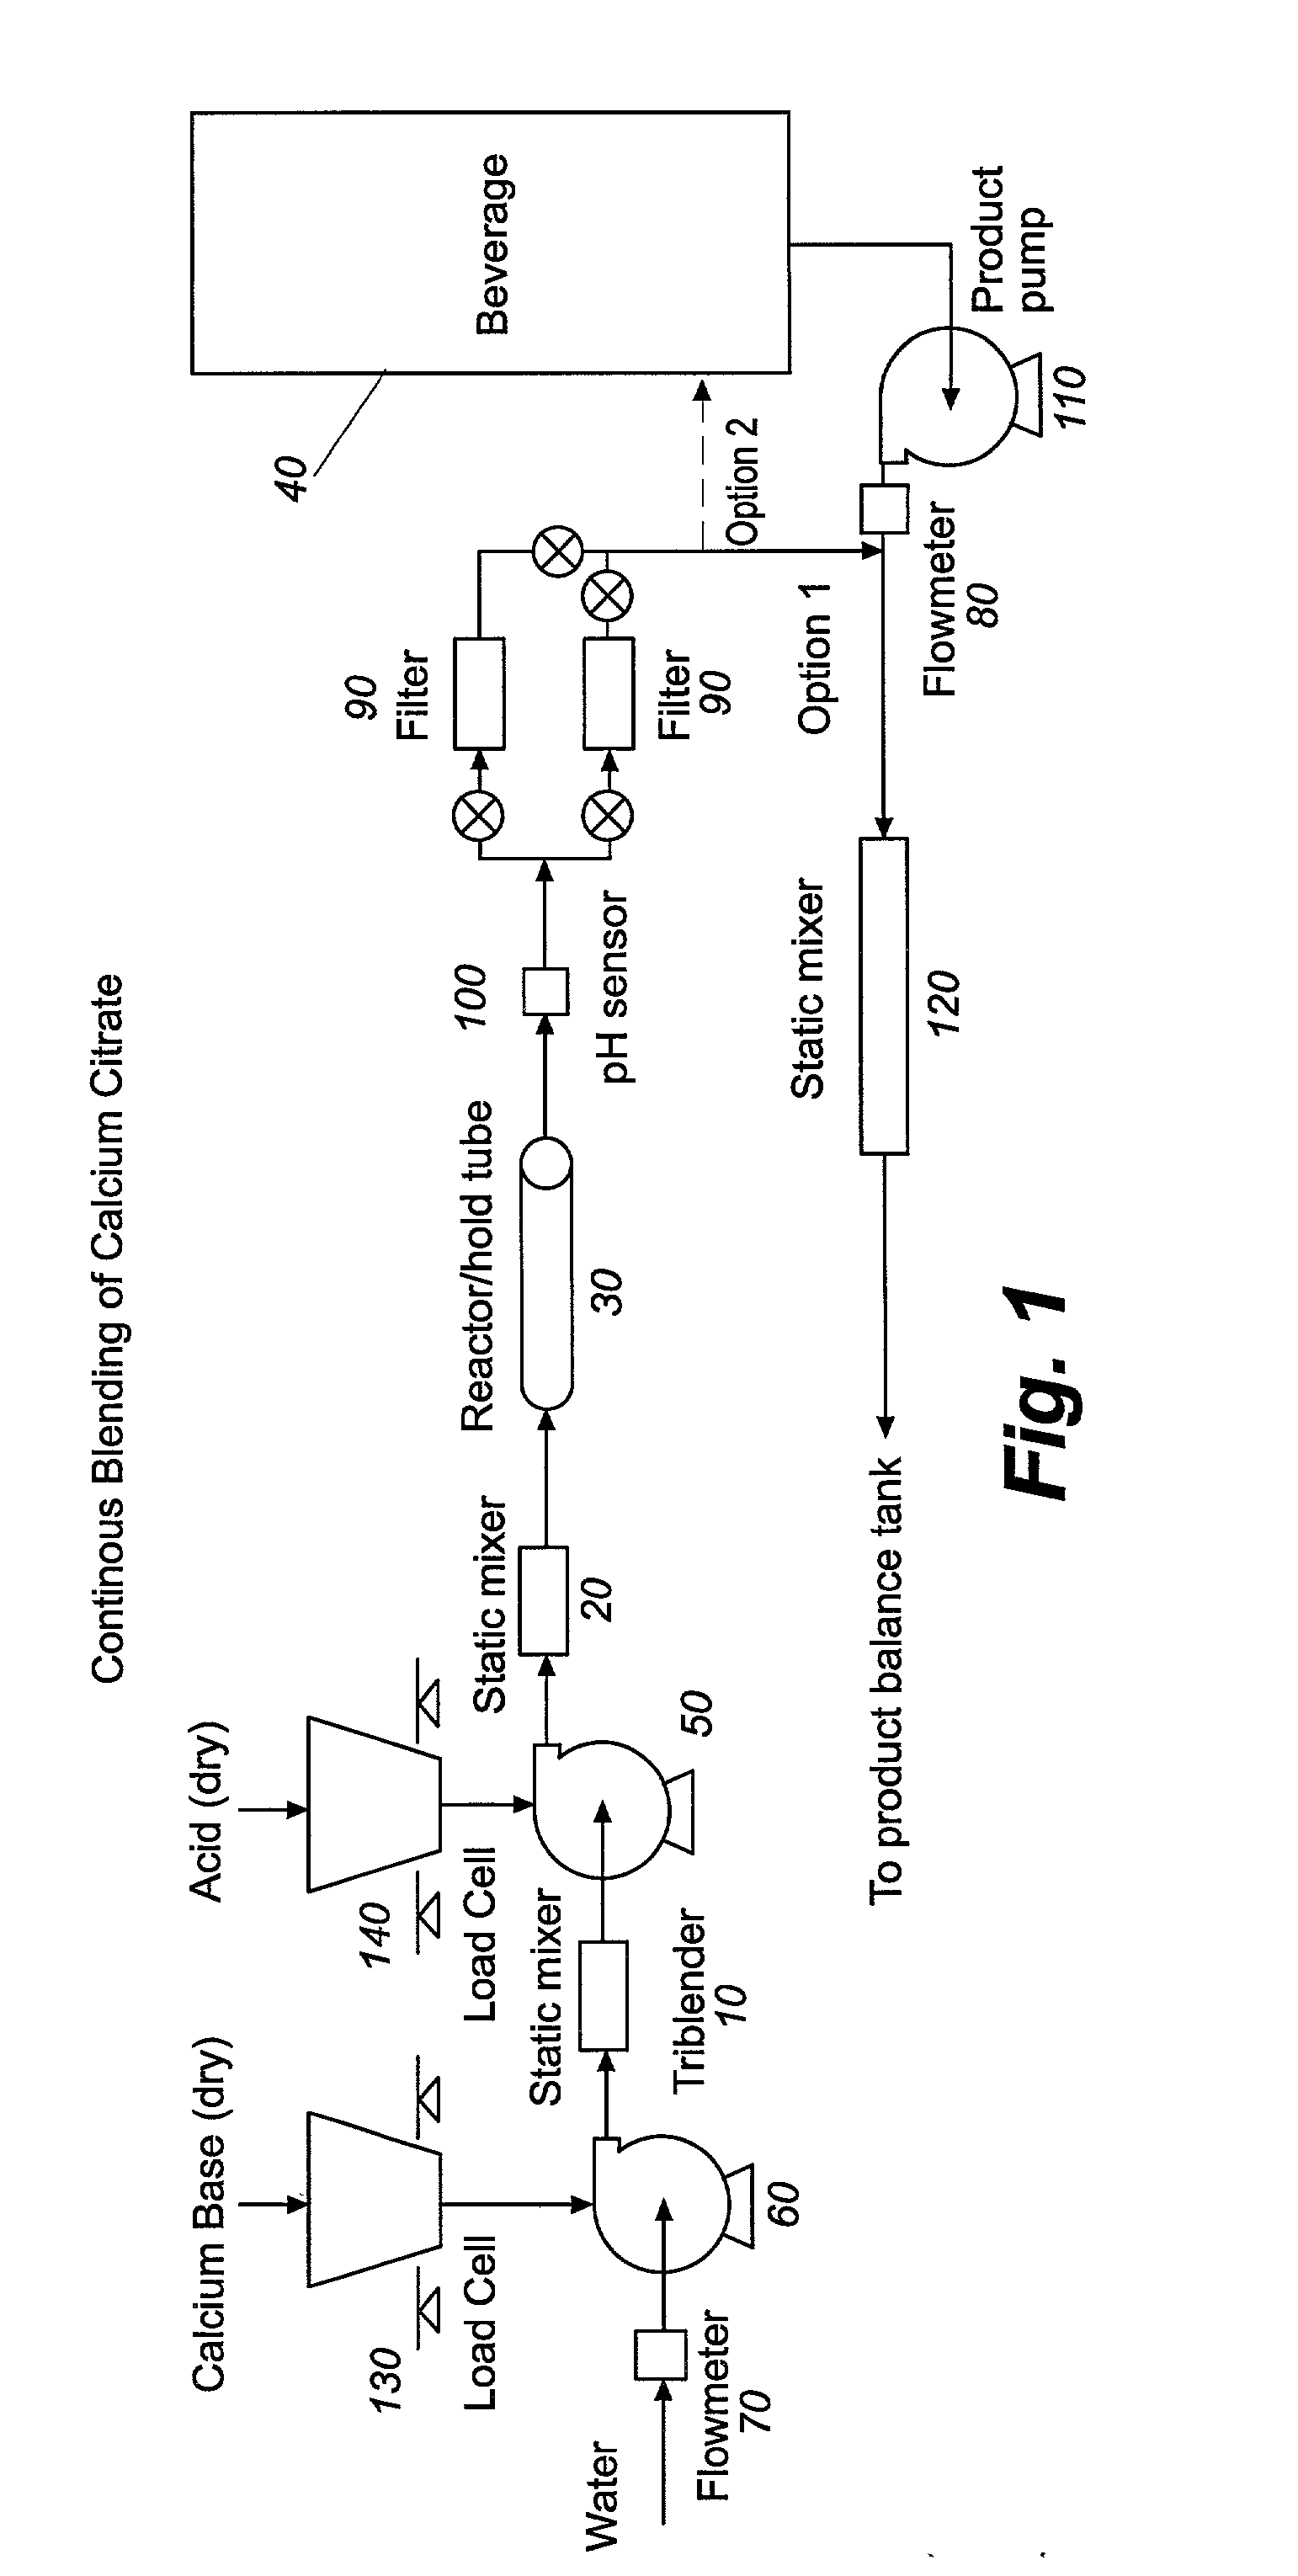 Process apparatus, and composition for calcium fortification of beverages